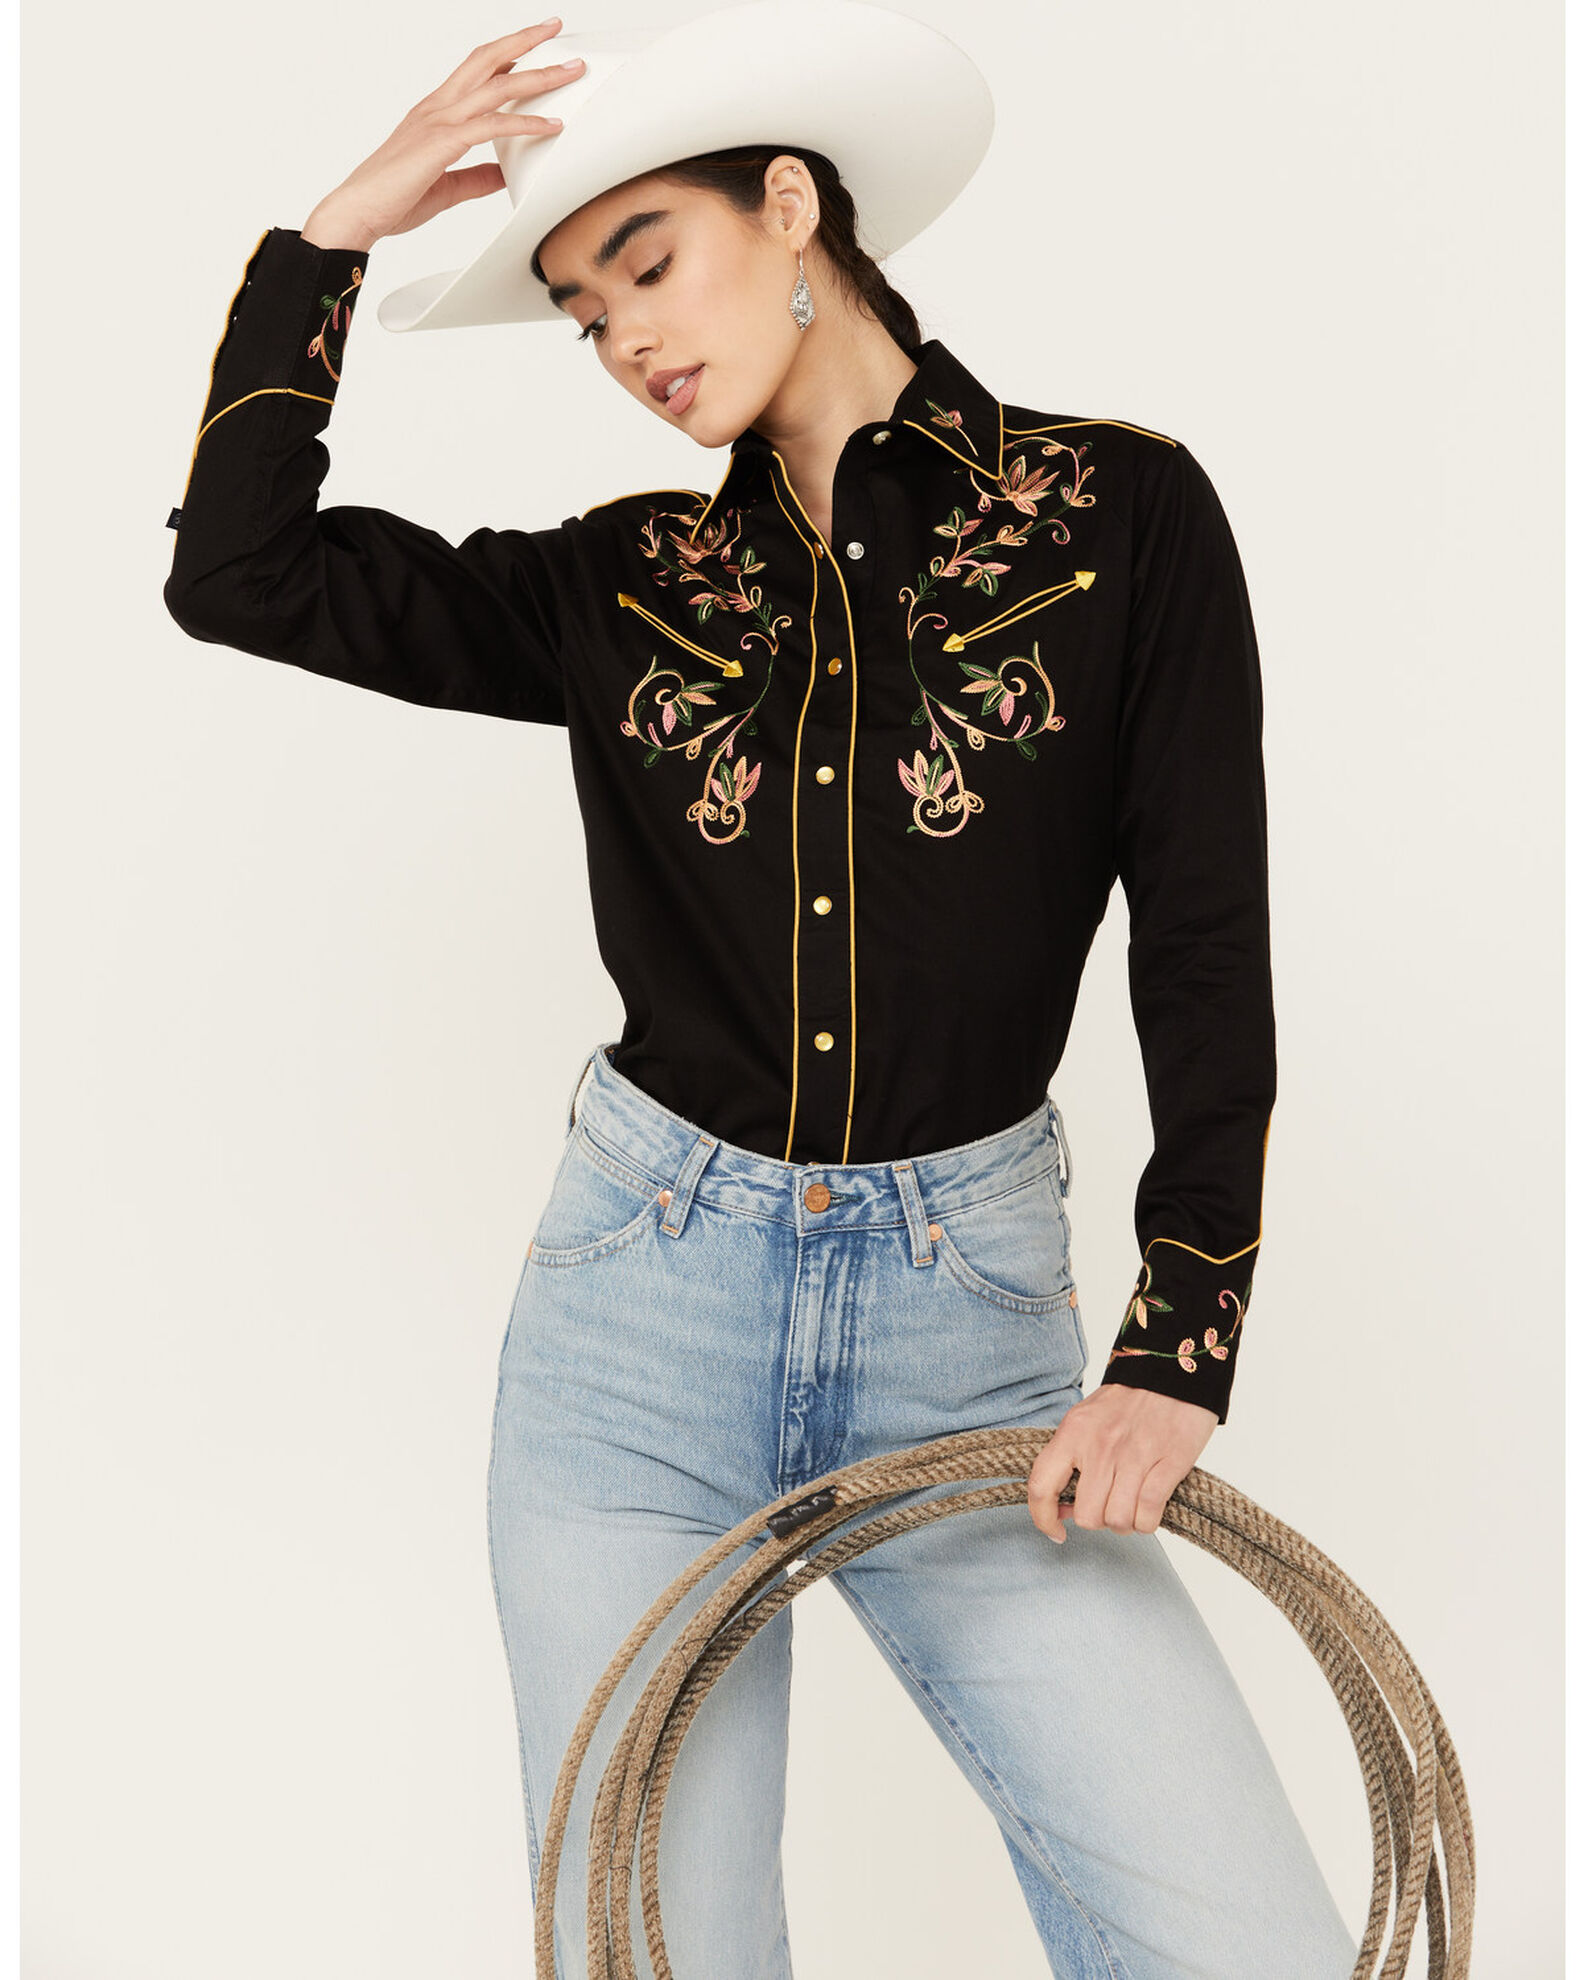 Product Name: Rockmount Ranchwear Women's Floral Embroidered Long Sleeve  Pearl Snap Western Shirt